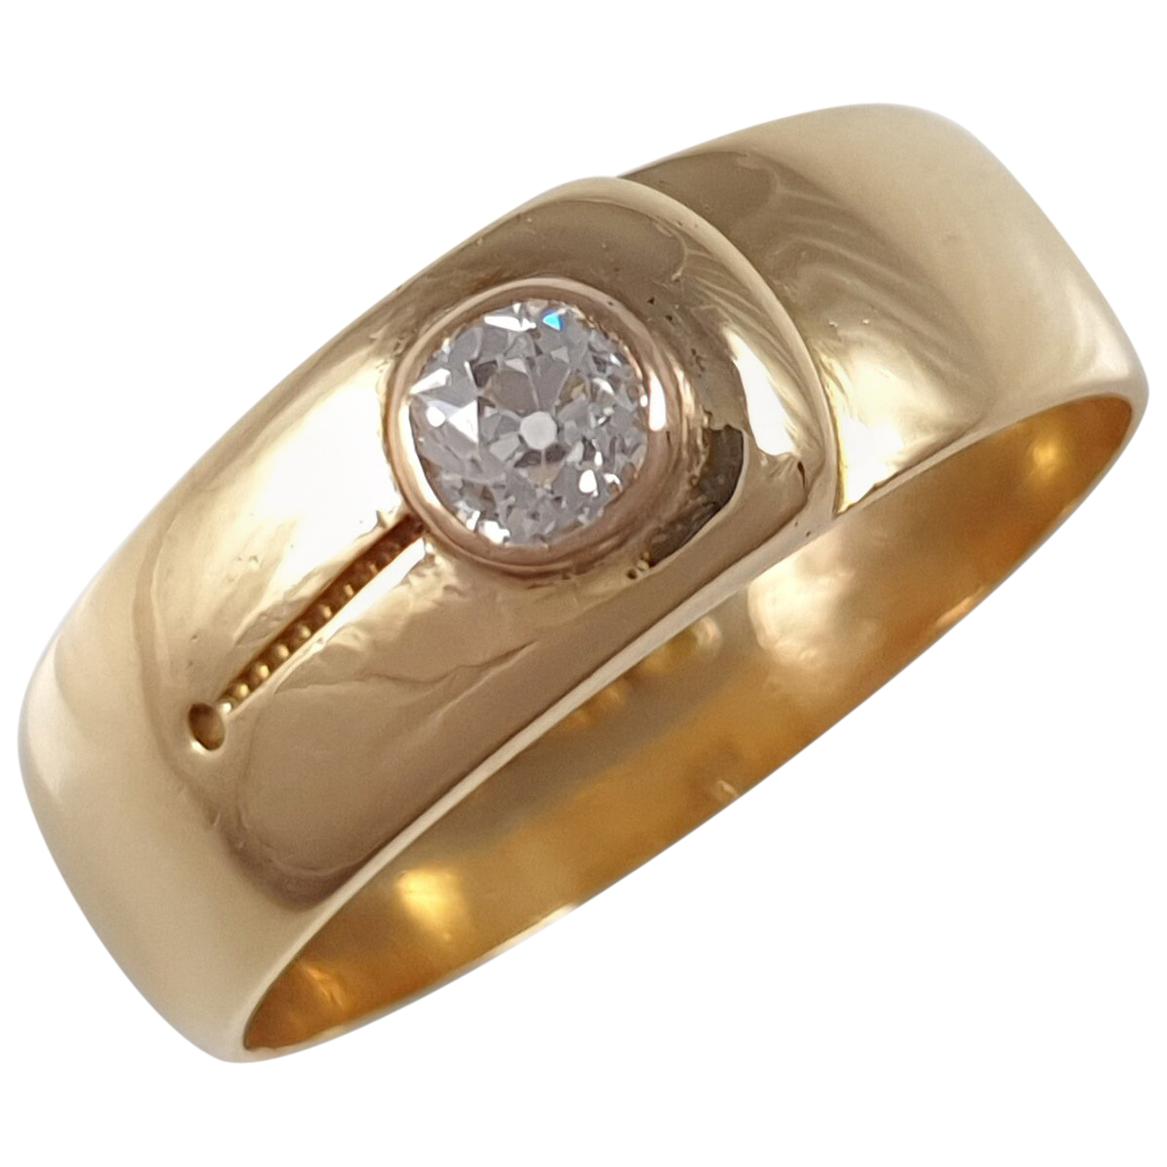 Victorian 18 Carat Yellow Gold and Diamond Buckle Ring, Chester, 1884